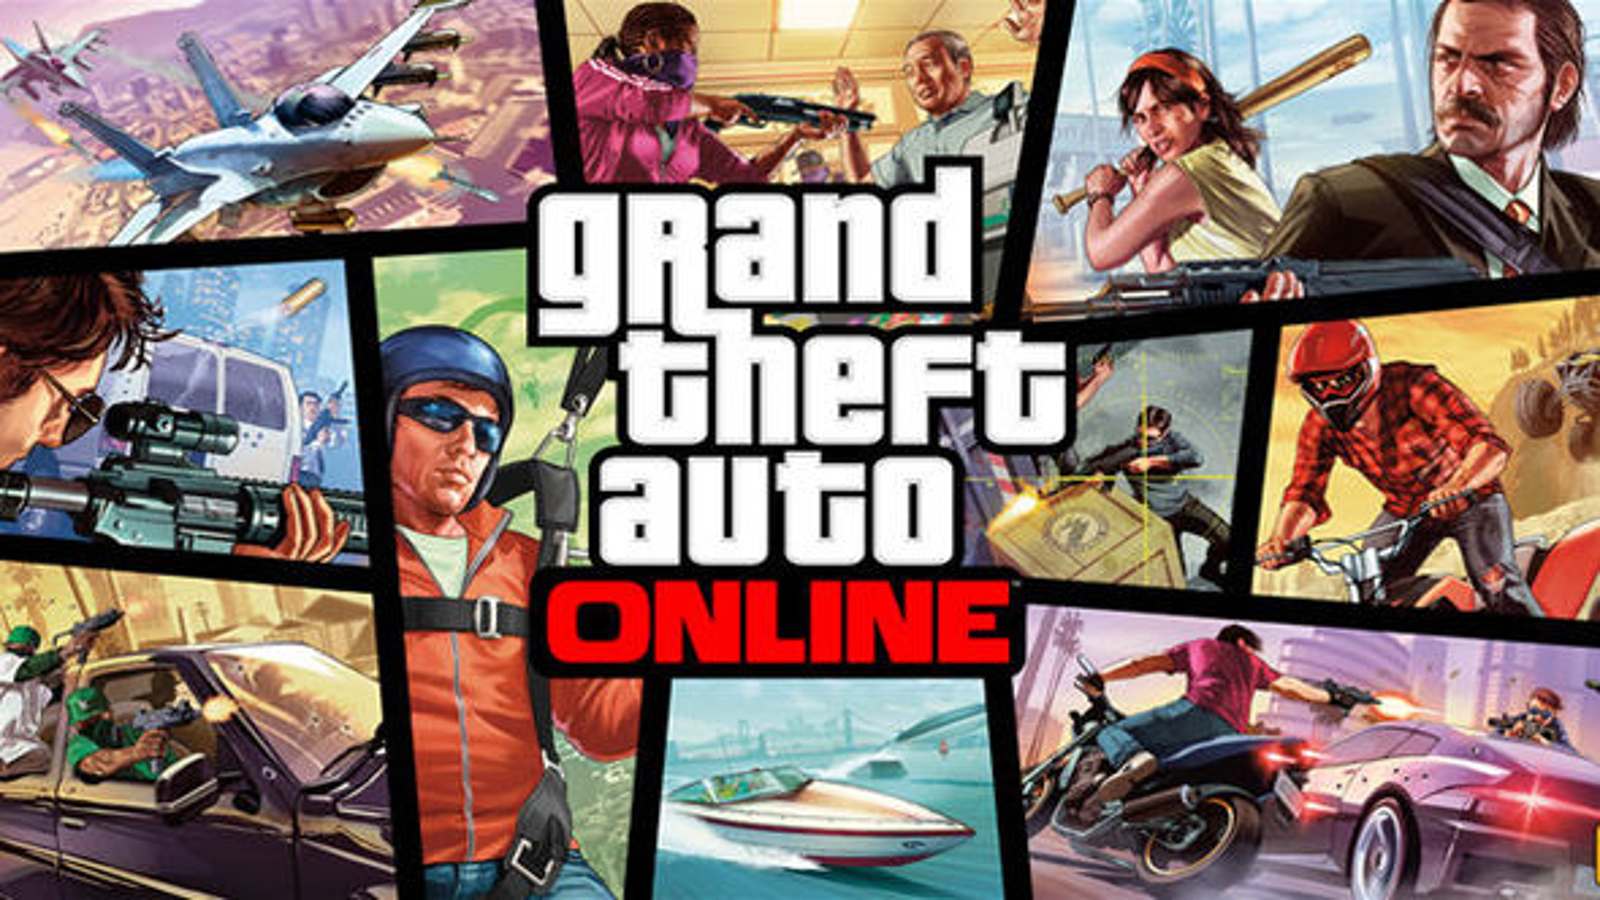 Grand Theft Auto: San Andreas is now free with Rockstar Games PC launcher